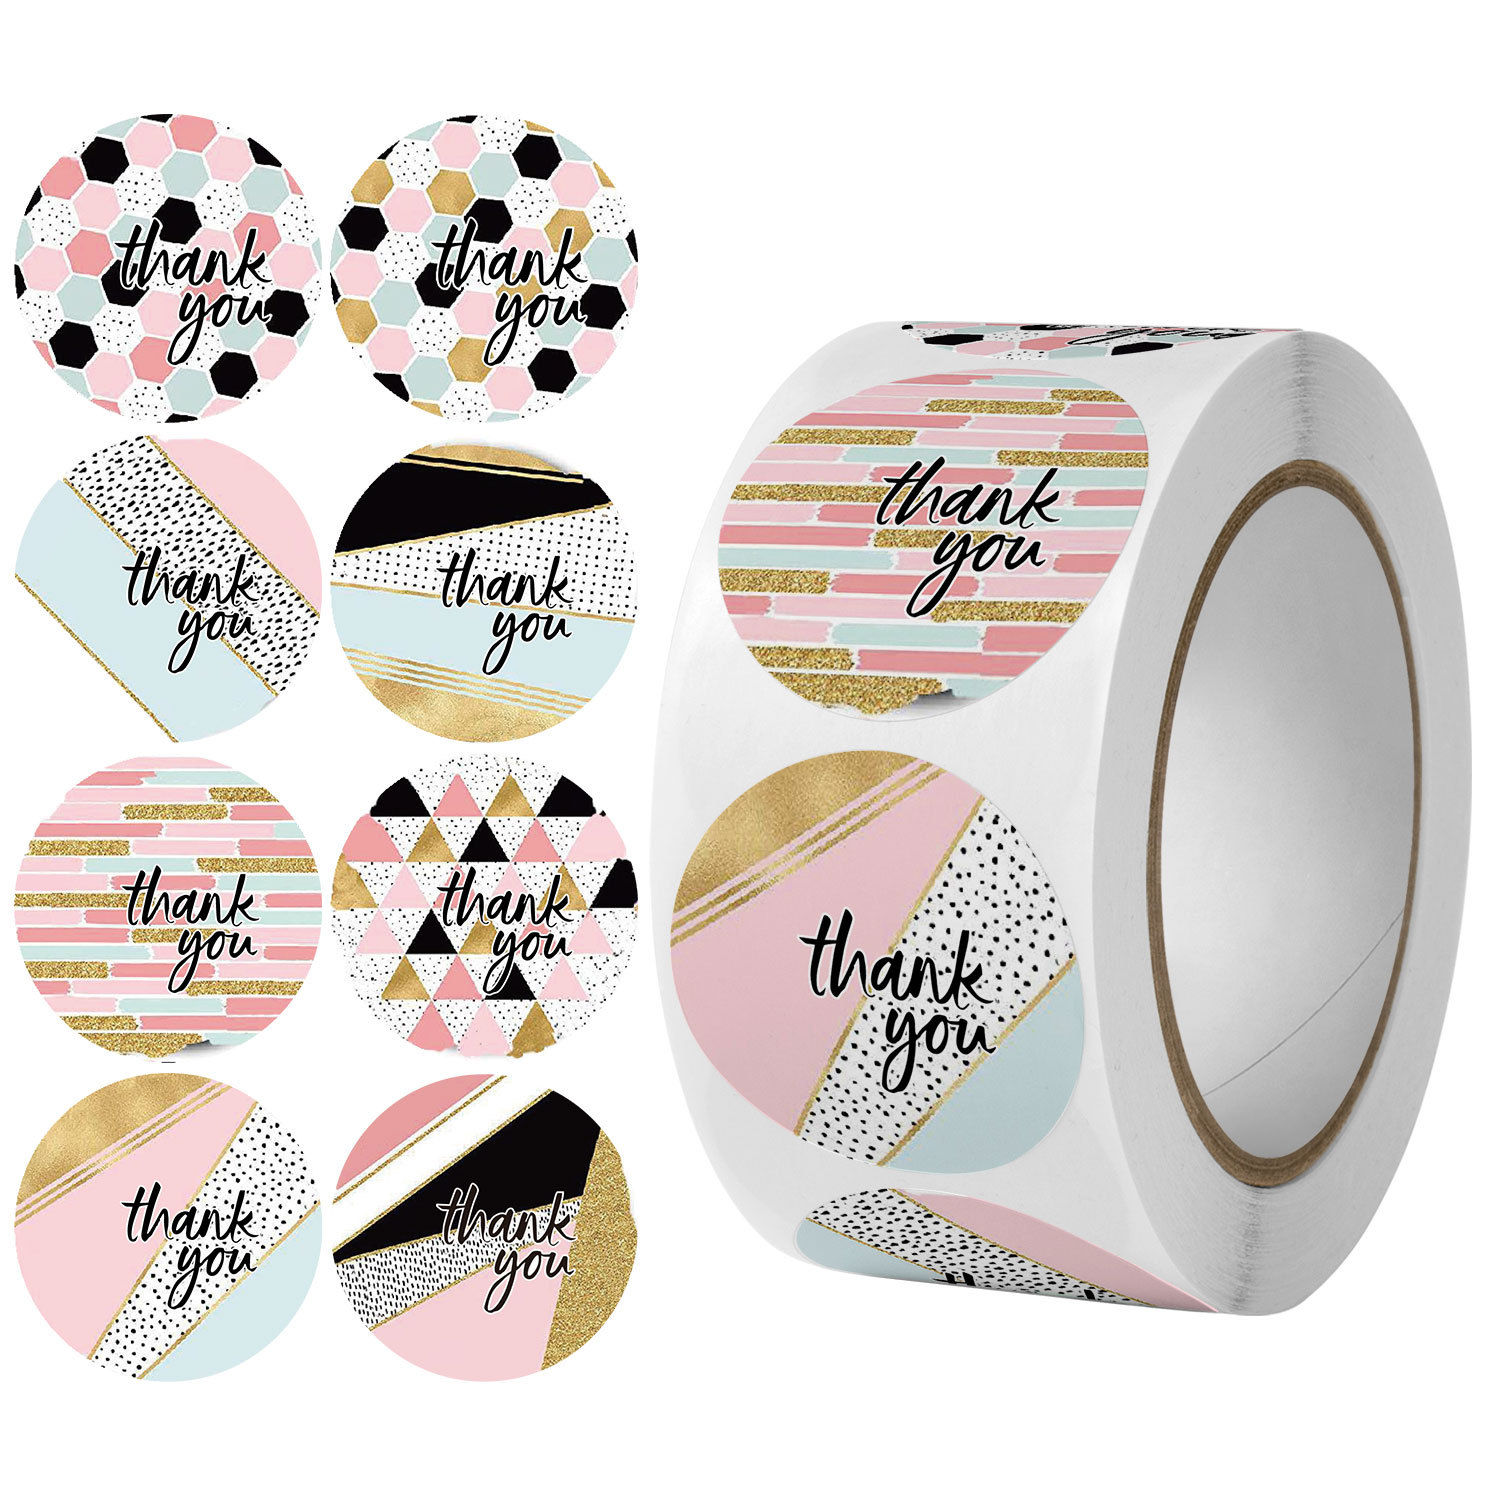 500pcs 1inch Thank You Stickers 8 Different Designs ..